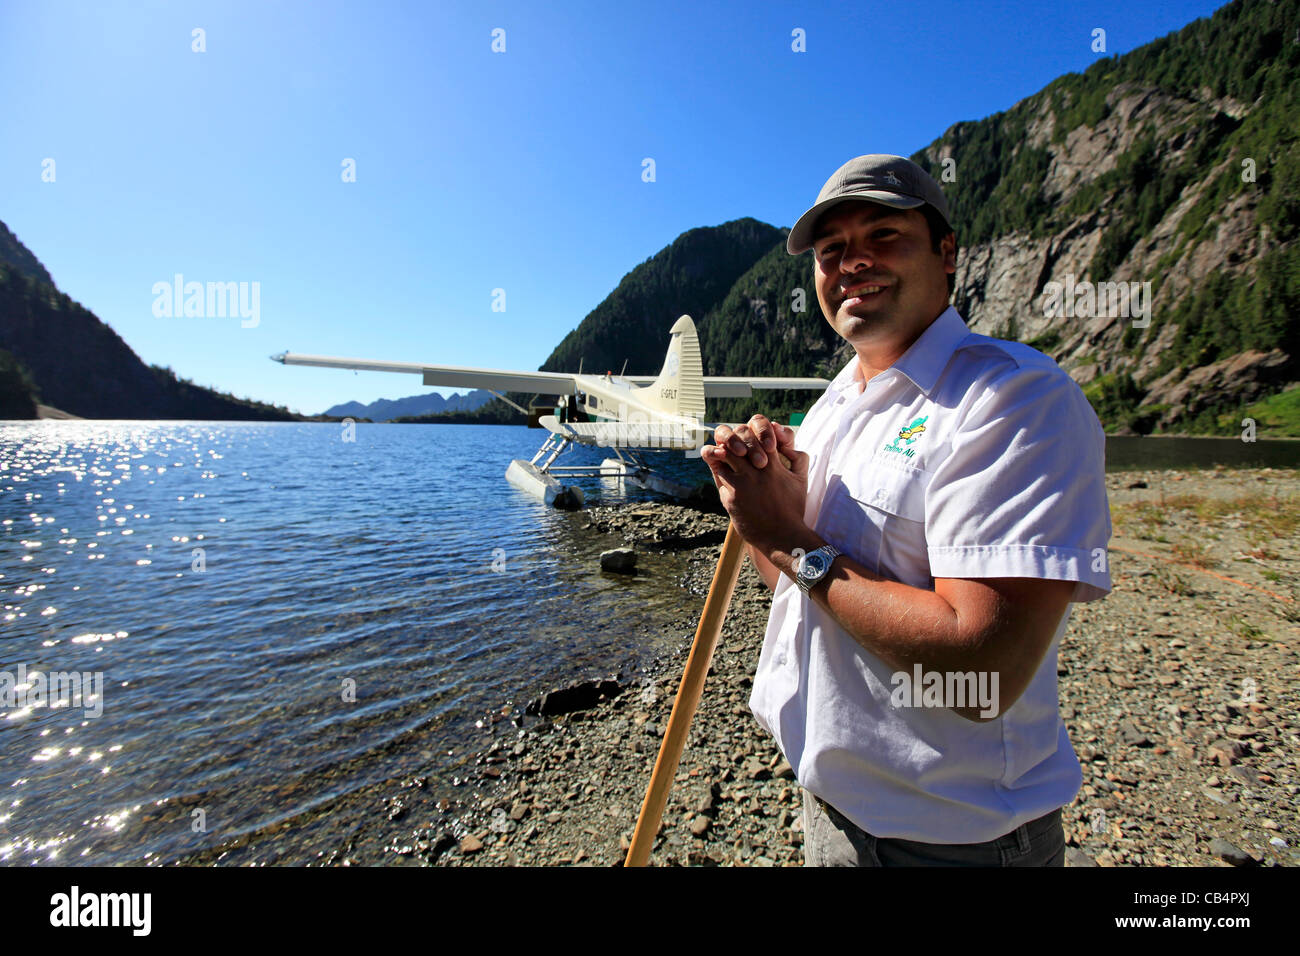 A pilot stands near his floatplane at a mountain lake in Vancouver Island Stock Photo